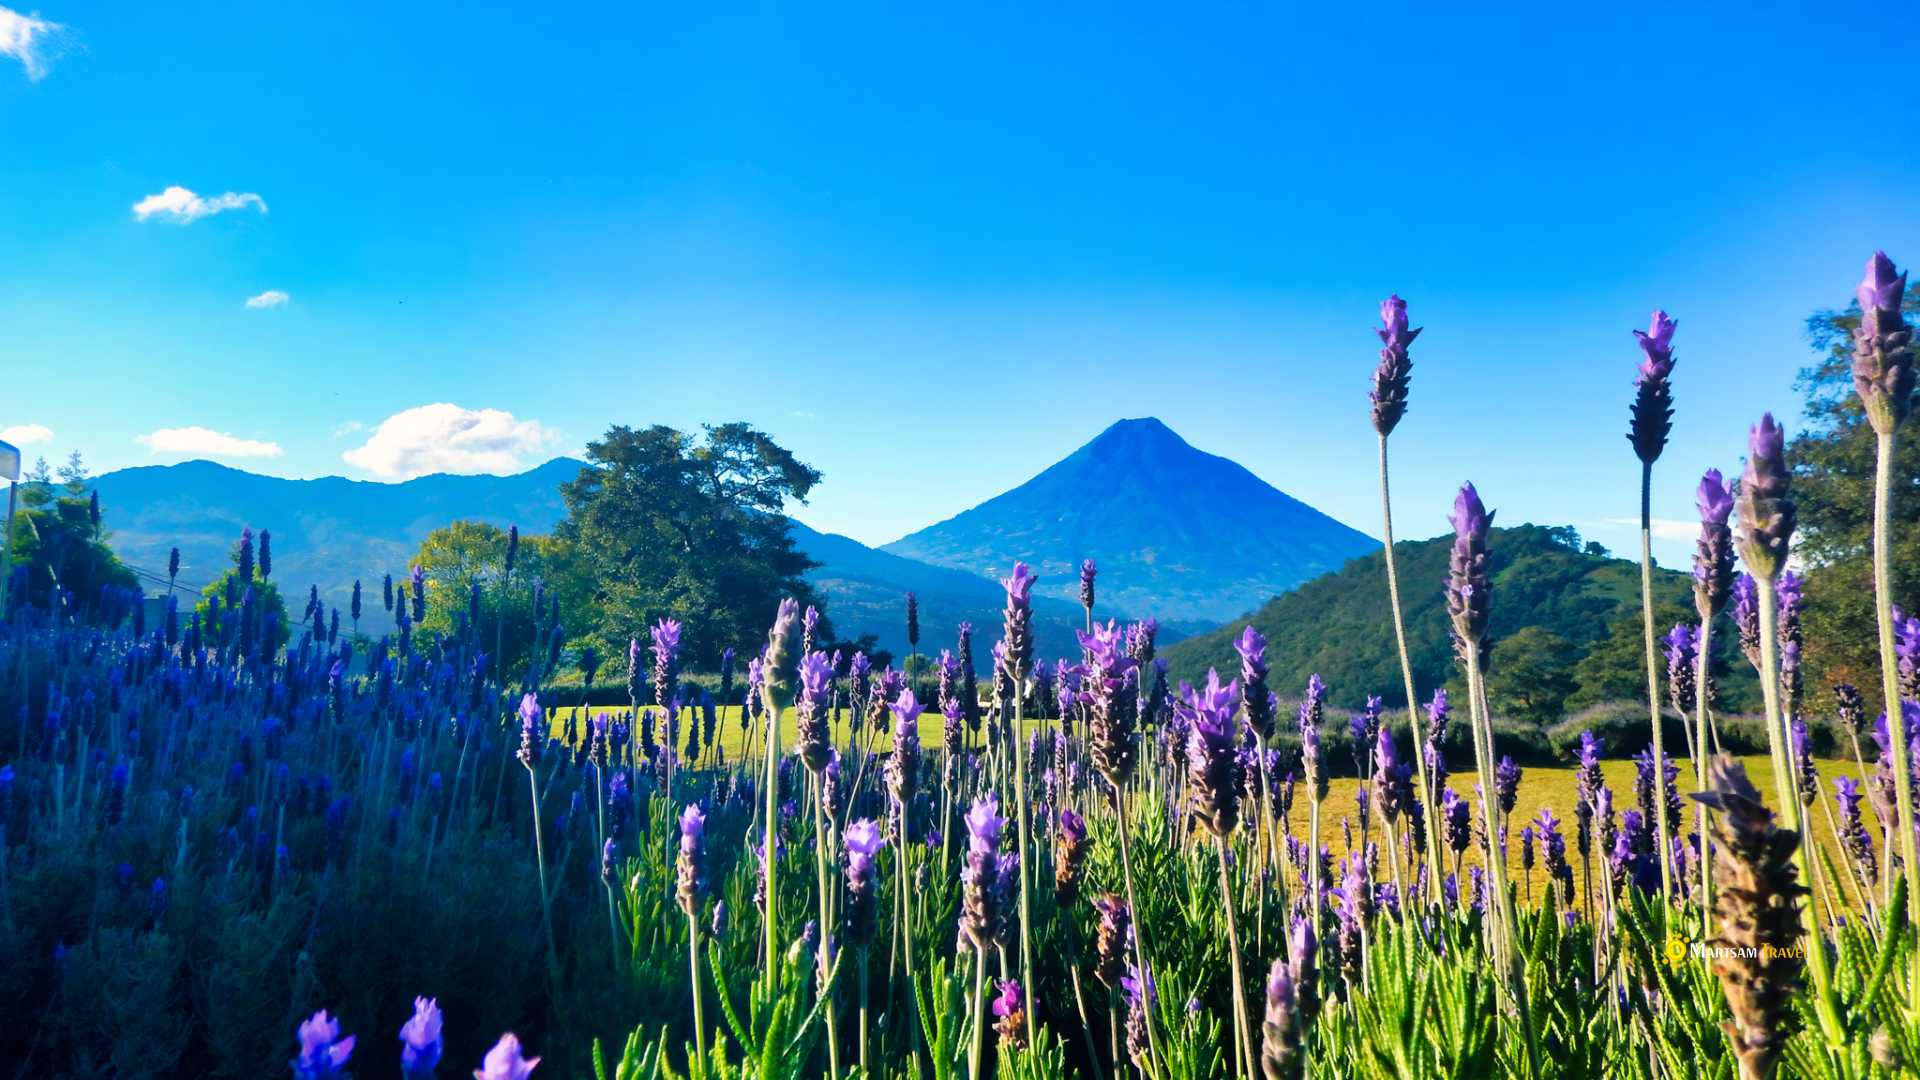 Stunning volcano landscape viewed from Antigua Guatemala's surroundings, captured during the Women in Nature Guatemala wellness tour by Martsam Travel.